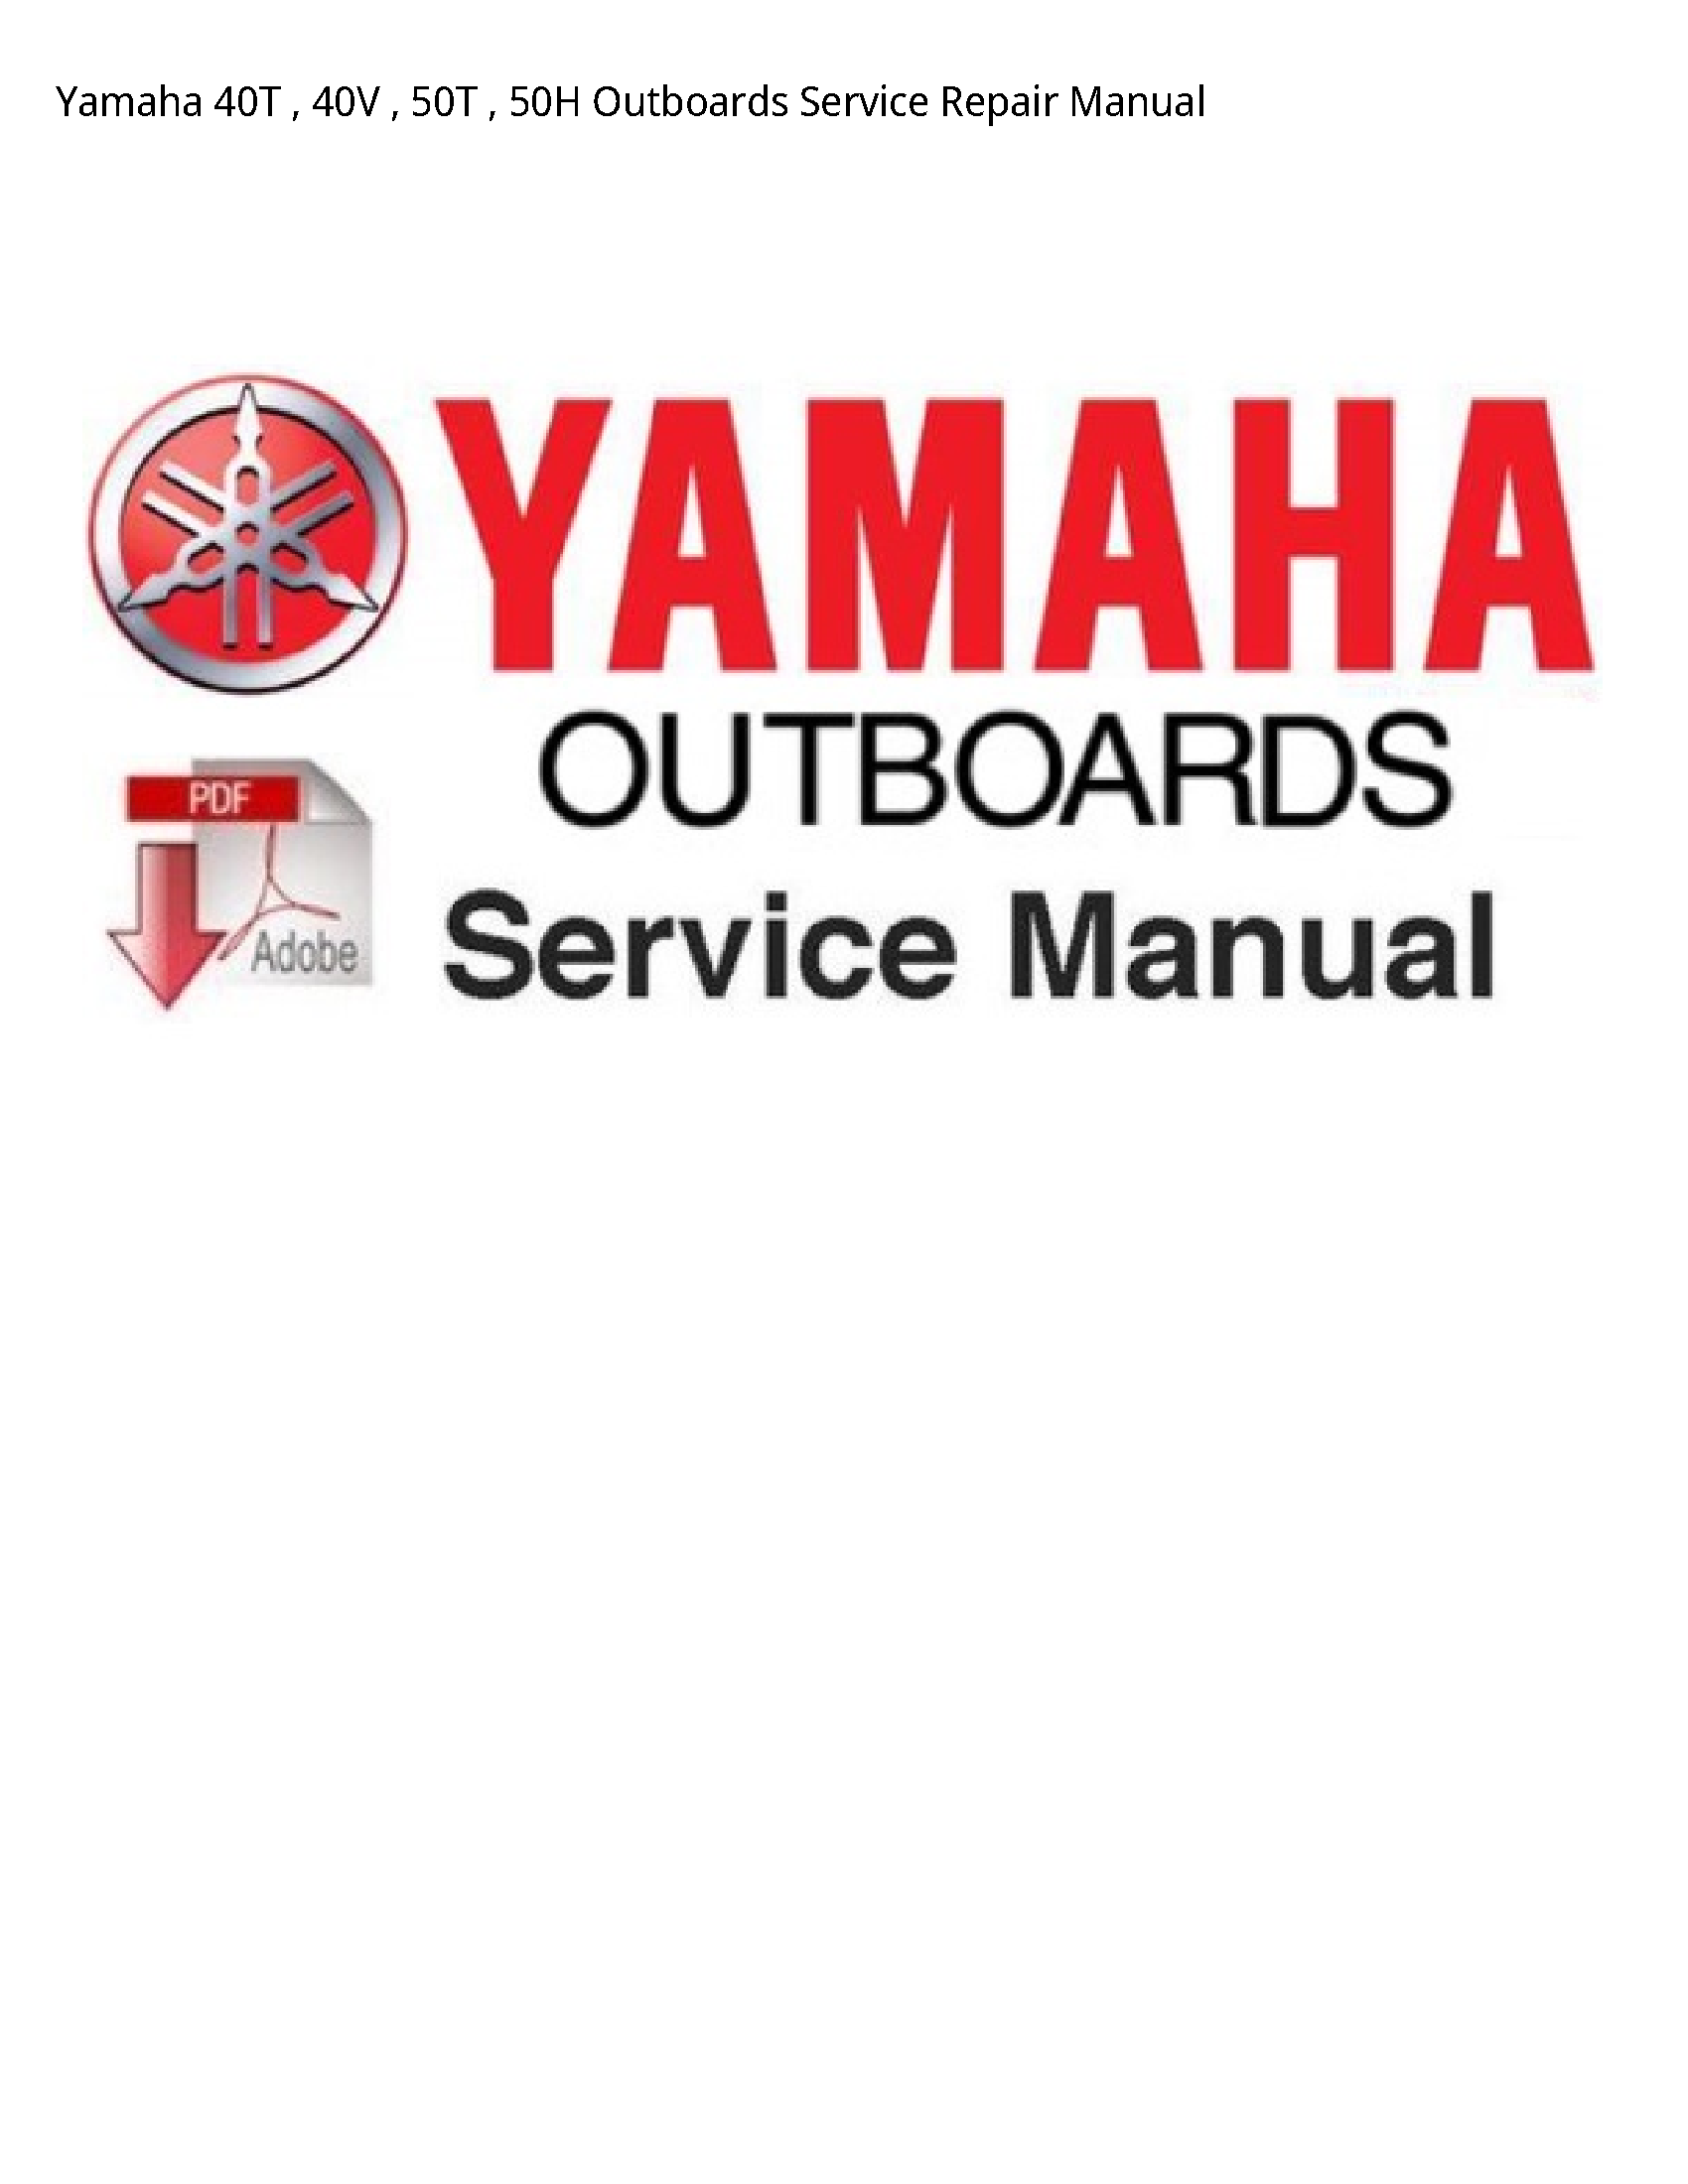 Yamaha 40T Outboards manual